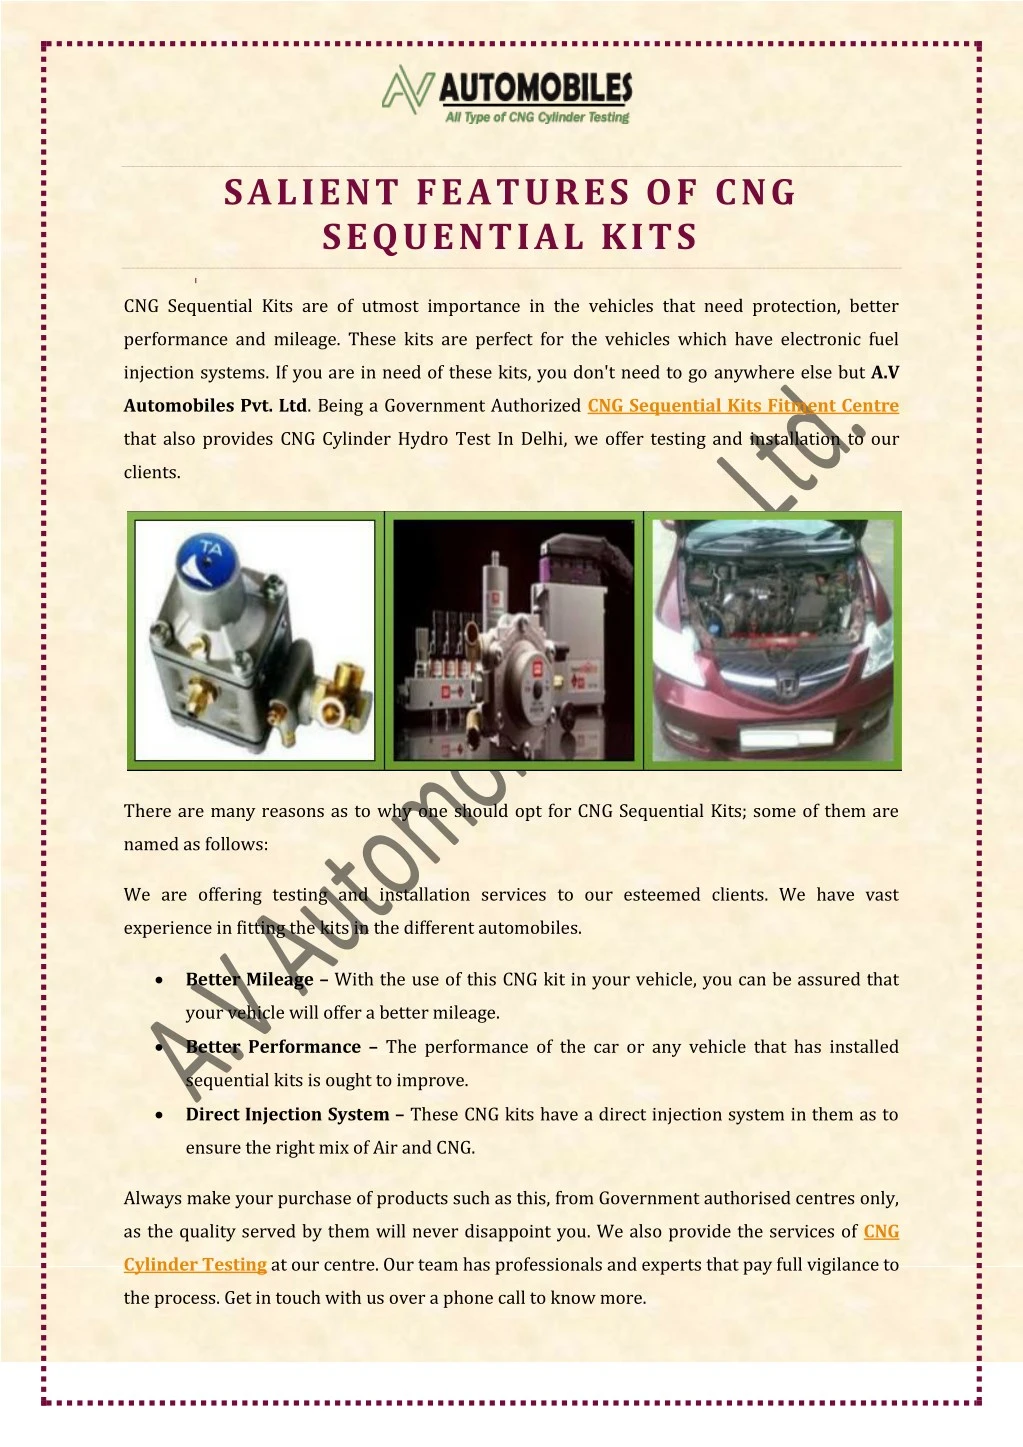 salient features of cng sequential kits